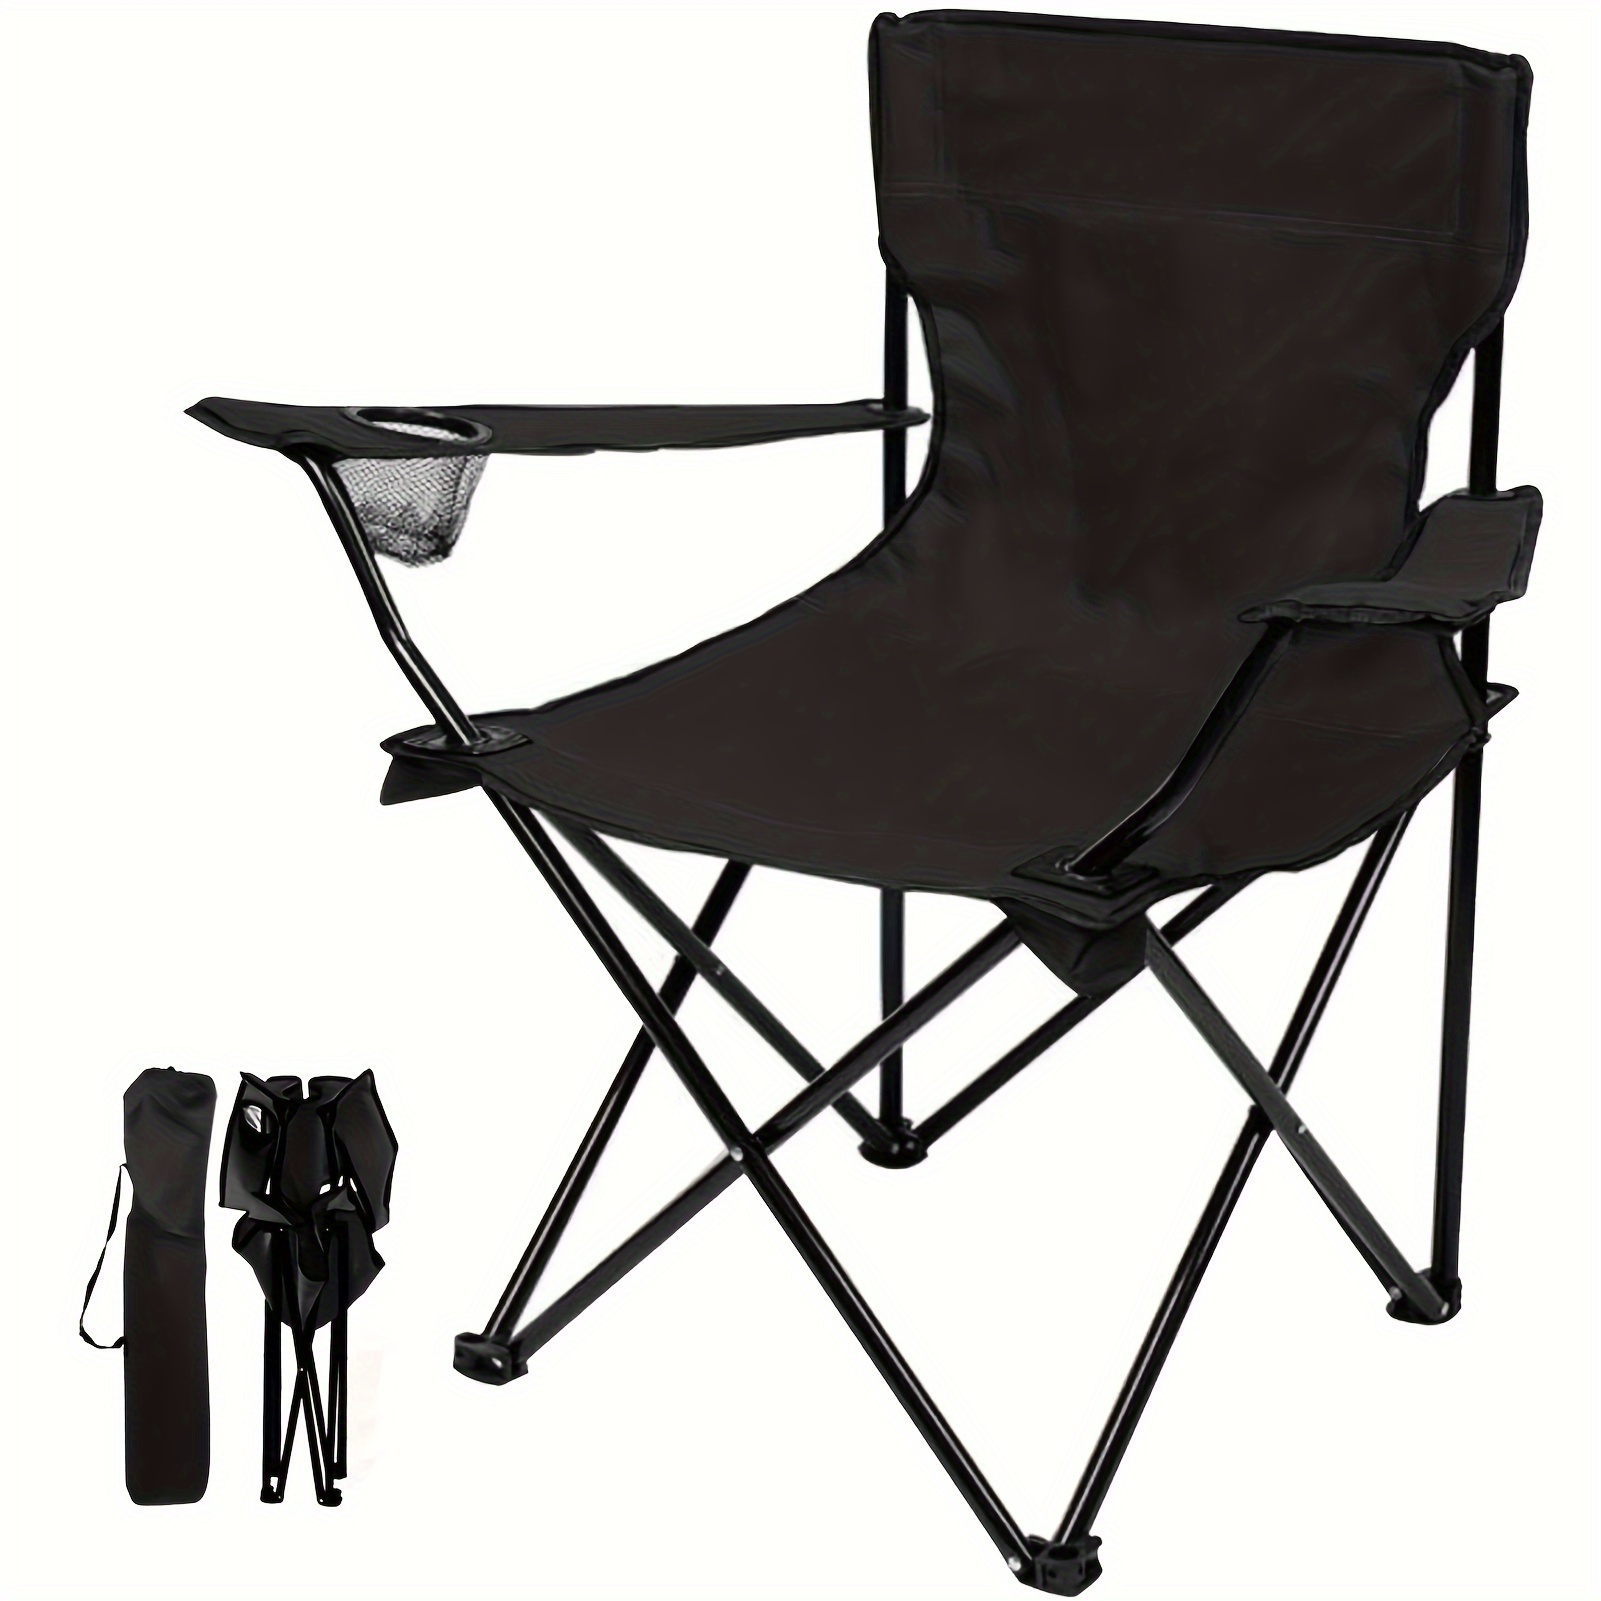 Outsunny Lightweight Camping Folding Chair Portable Fishing Seat w/ Carry  Bag, Cup Holder & Side Table for Travel, Beach, Picnic, Hiking, Black &  Yellow Bag